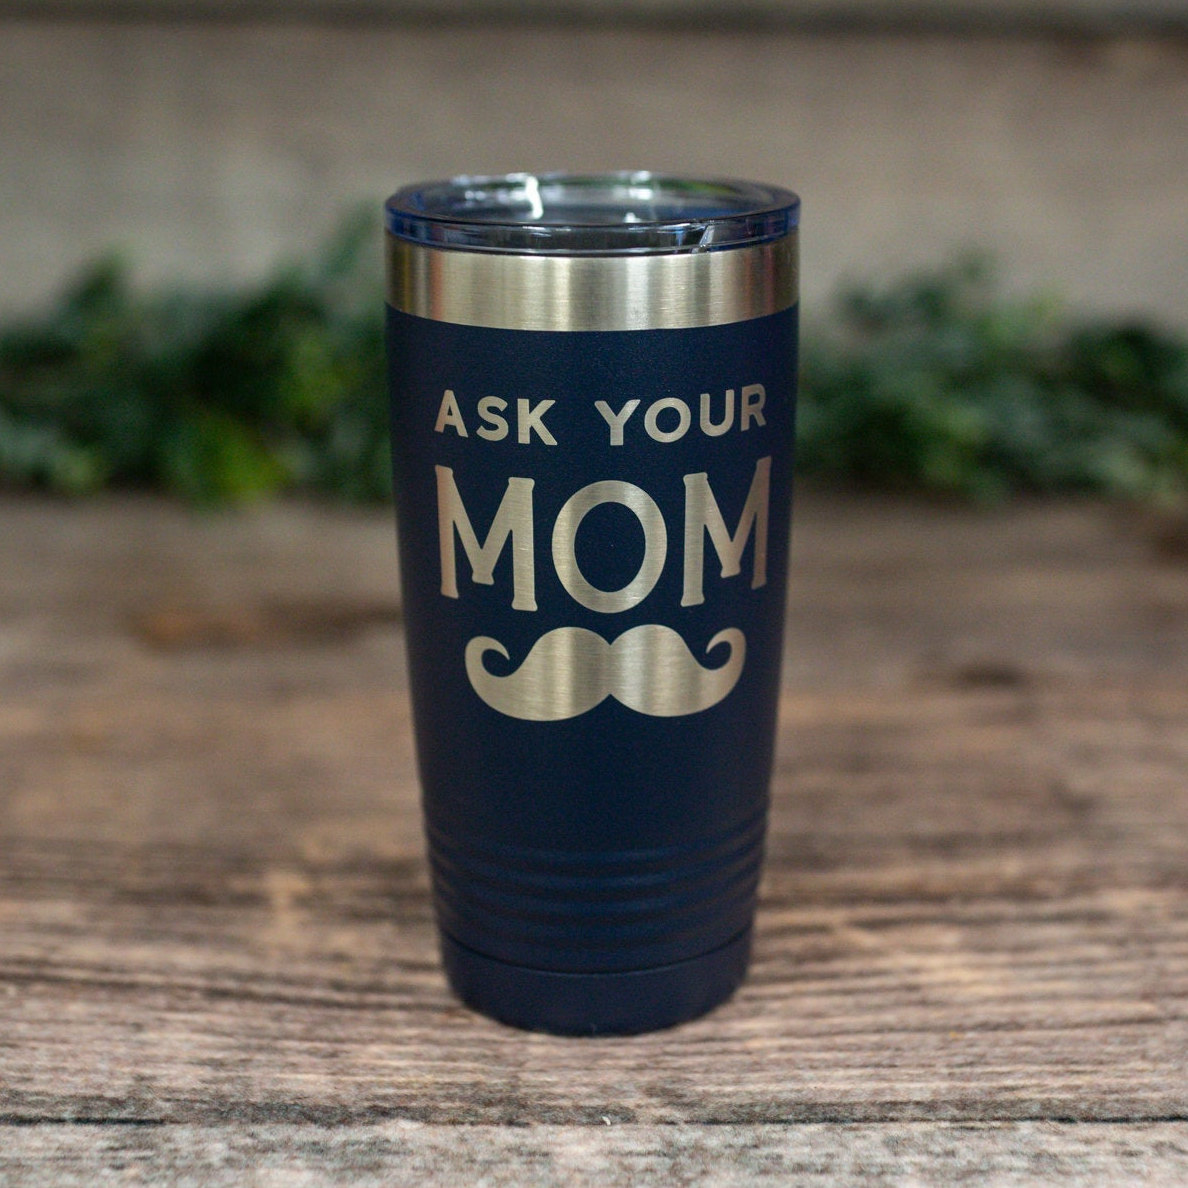 I Need A Double Shot – Engraved Stainless Steel Tumbler, Twin Mom Mug,  Triplet Gift Cup – 3C Etching LTD